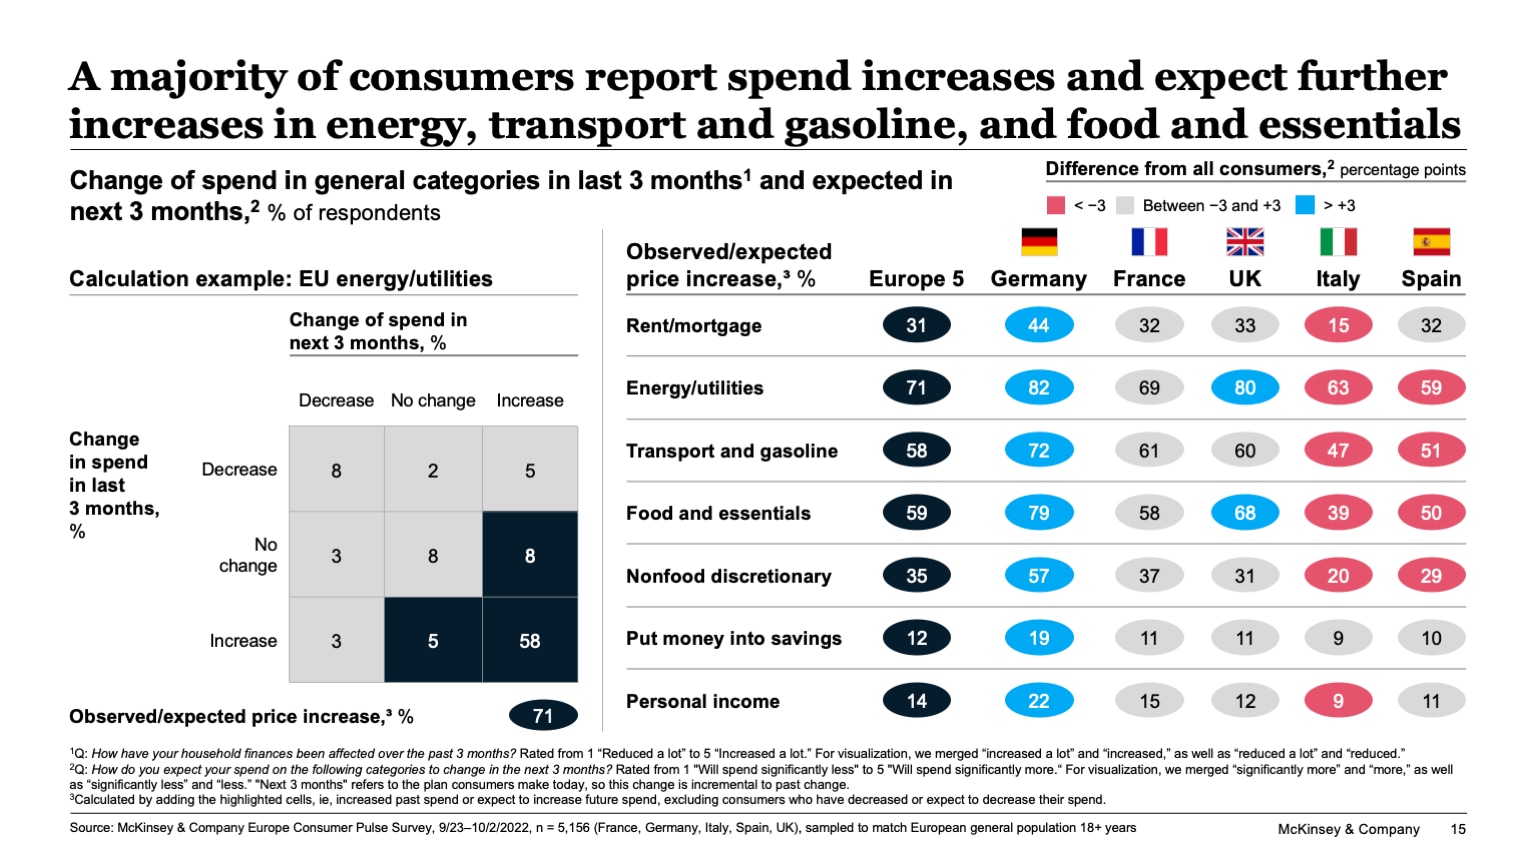 A majority of consumers report spend increases and expect further increases in energy, transport and gasoline, and food and essentials